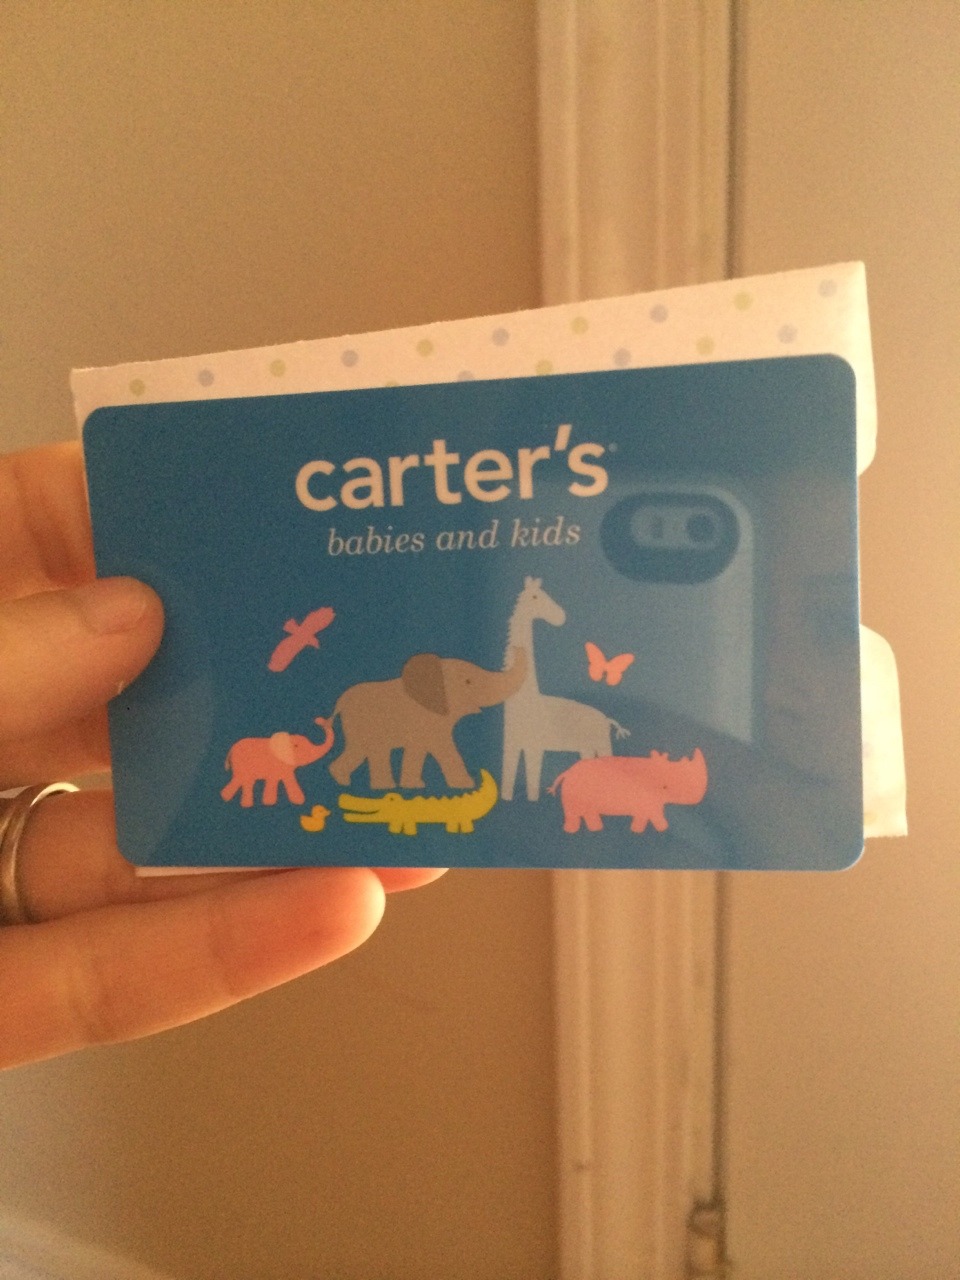 sophia-and-me:  Ohkay, here it is!! I’m doing a $25 Carter’s gift card giveaway!!